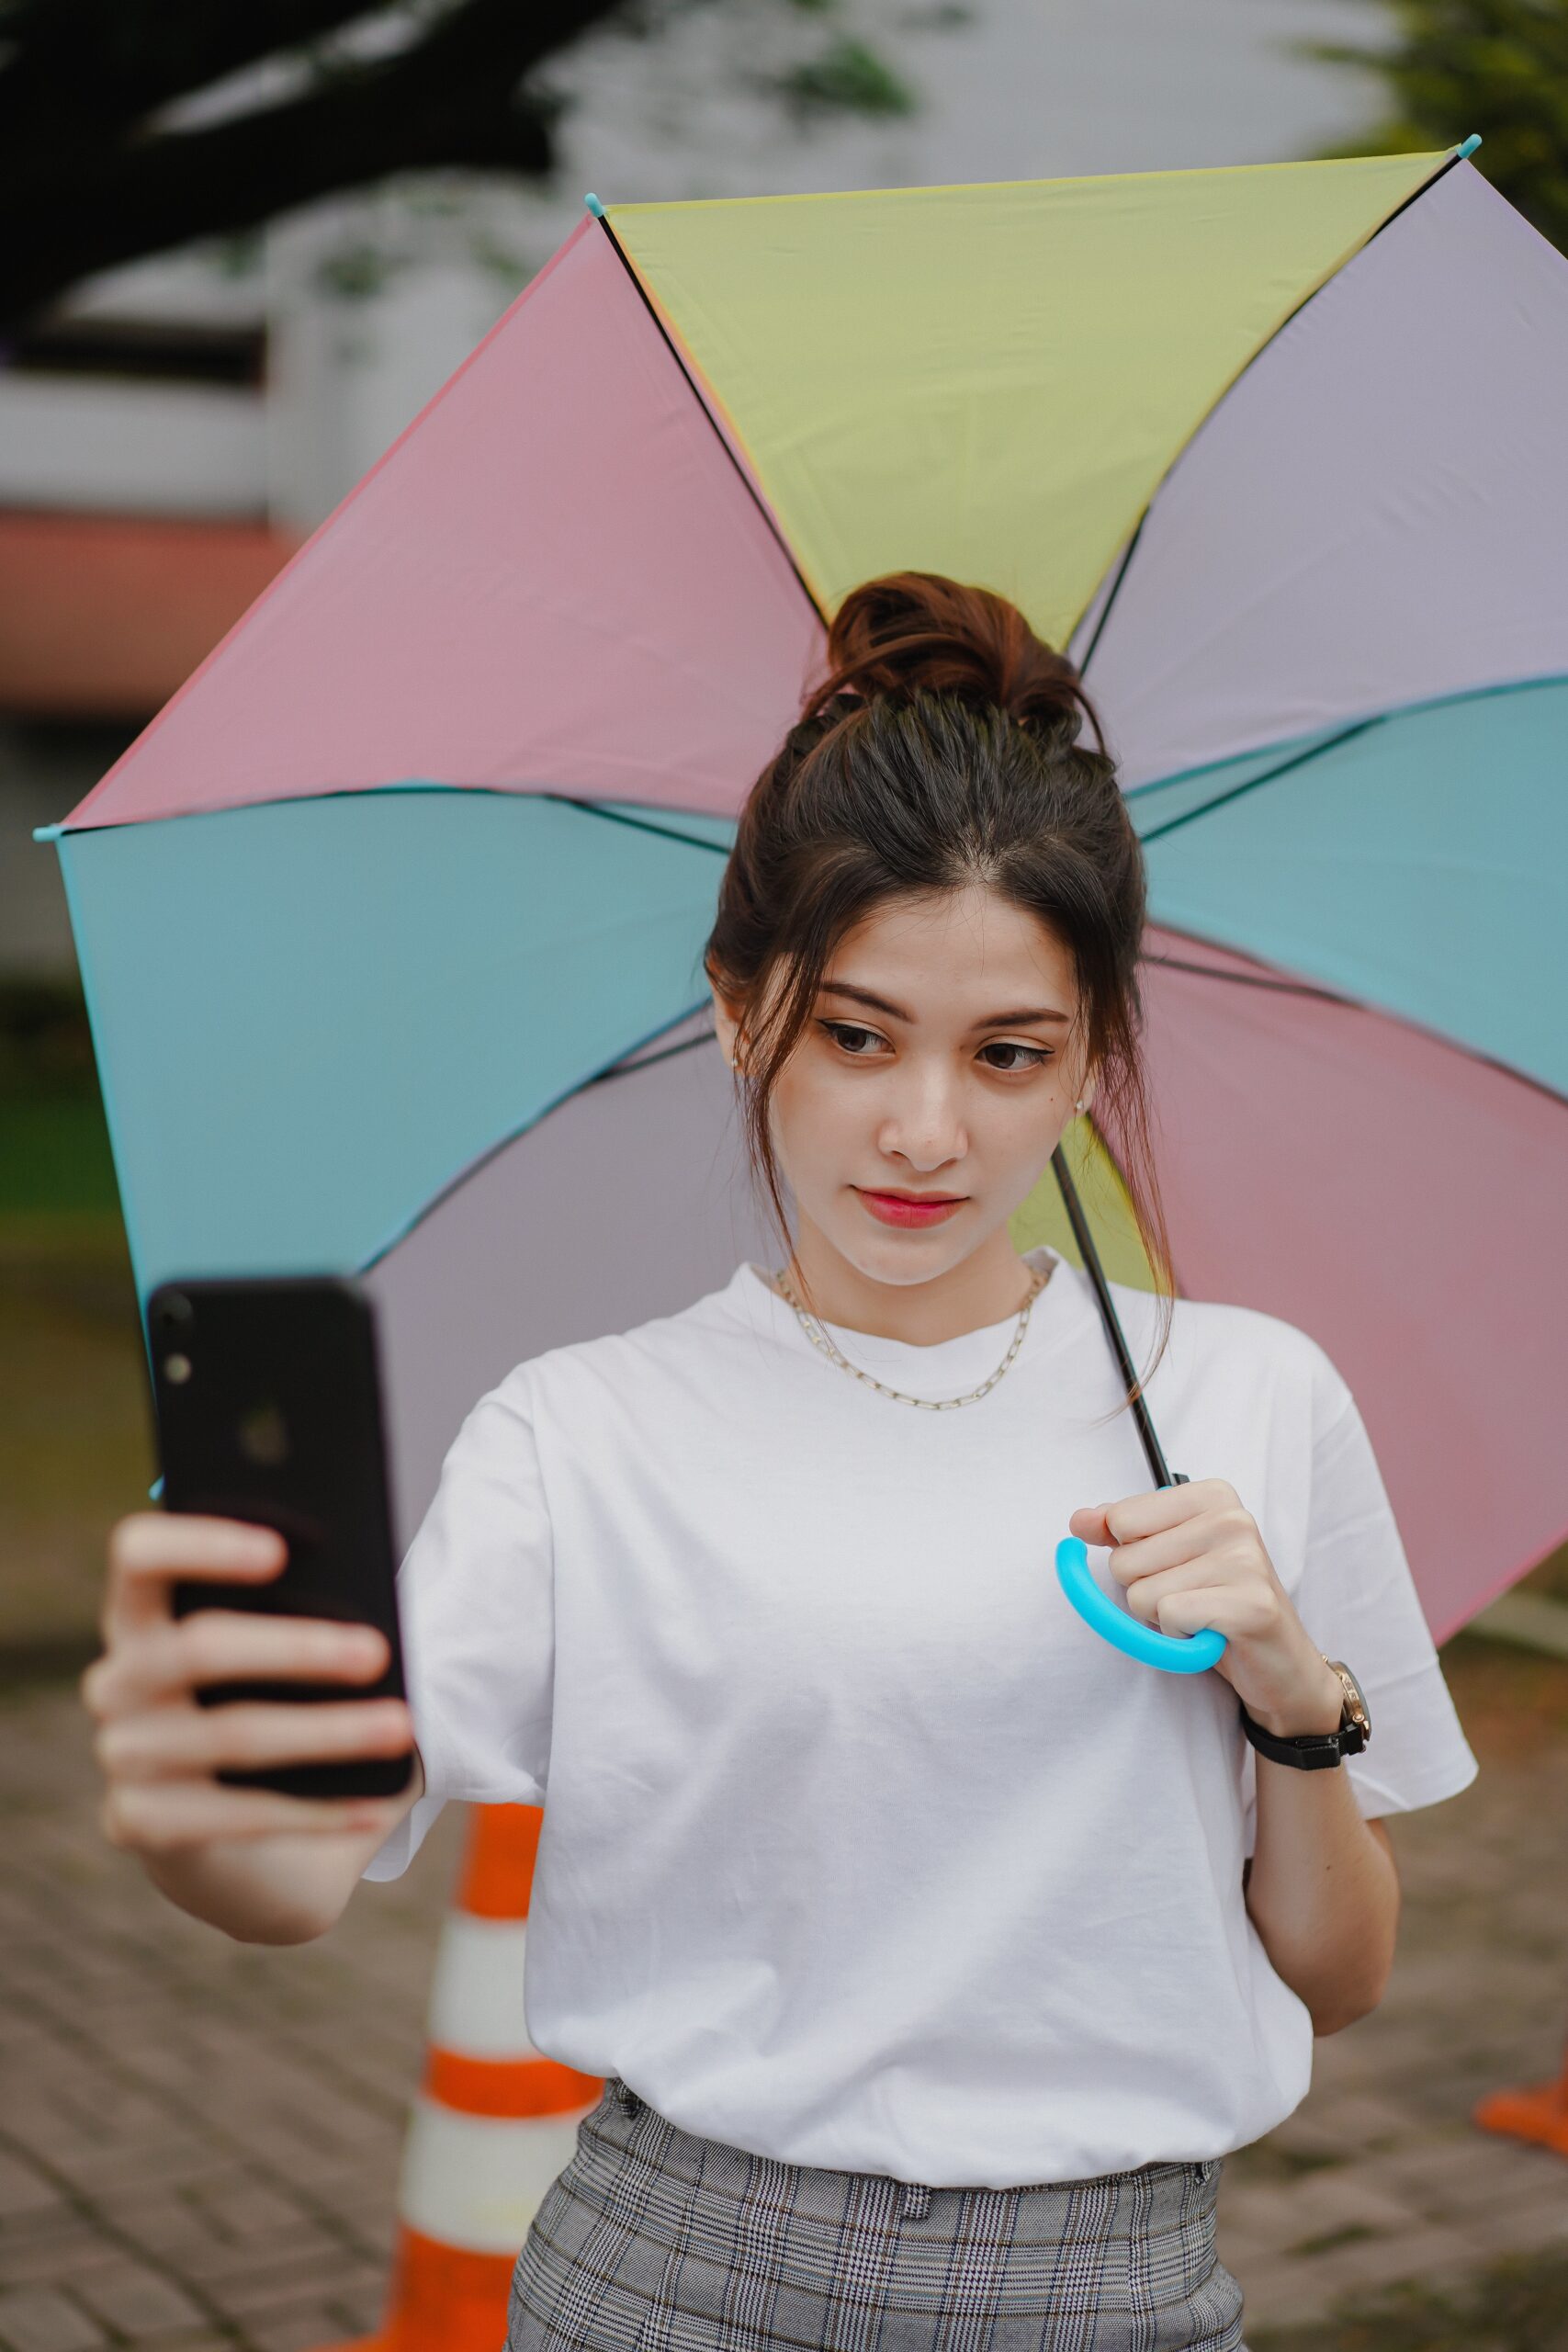 A girl with an umbrella takes a selfie with a phone.